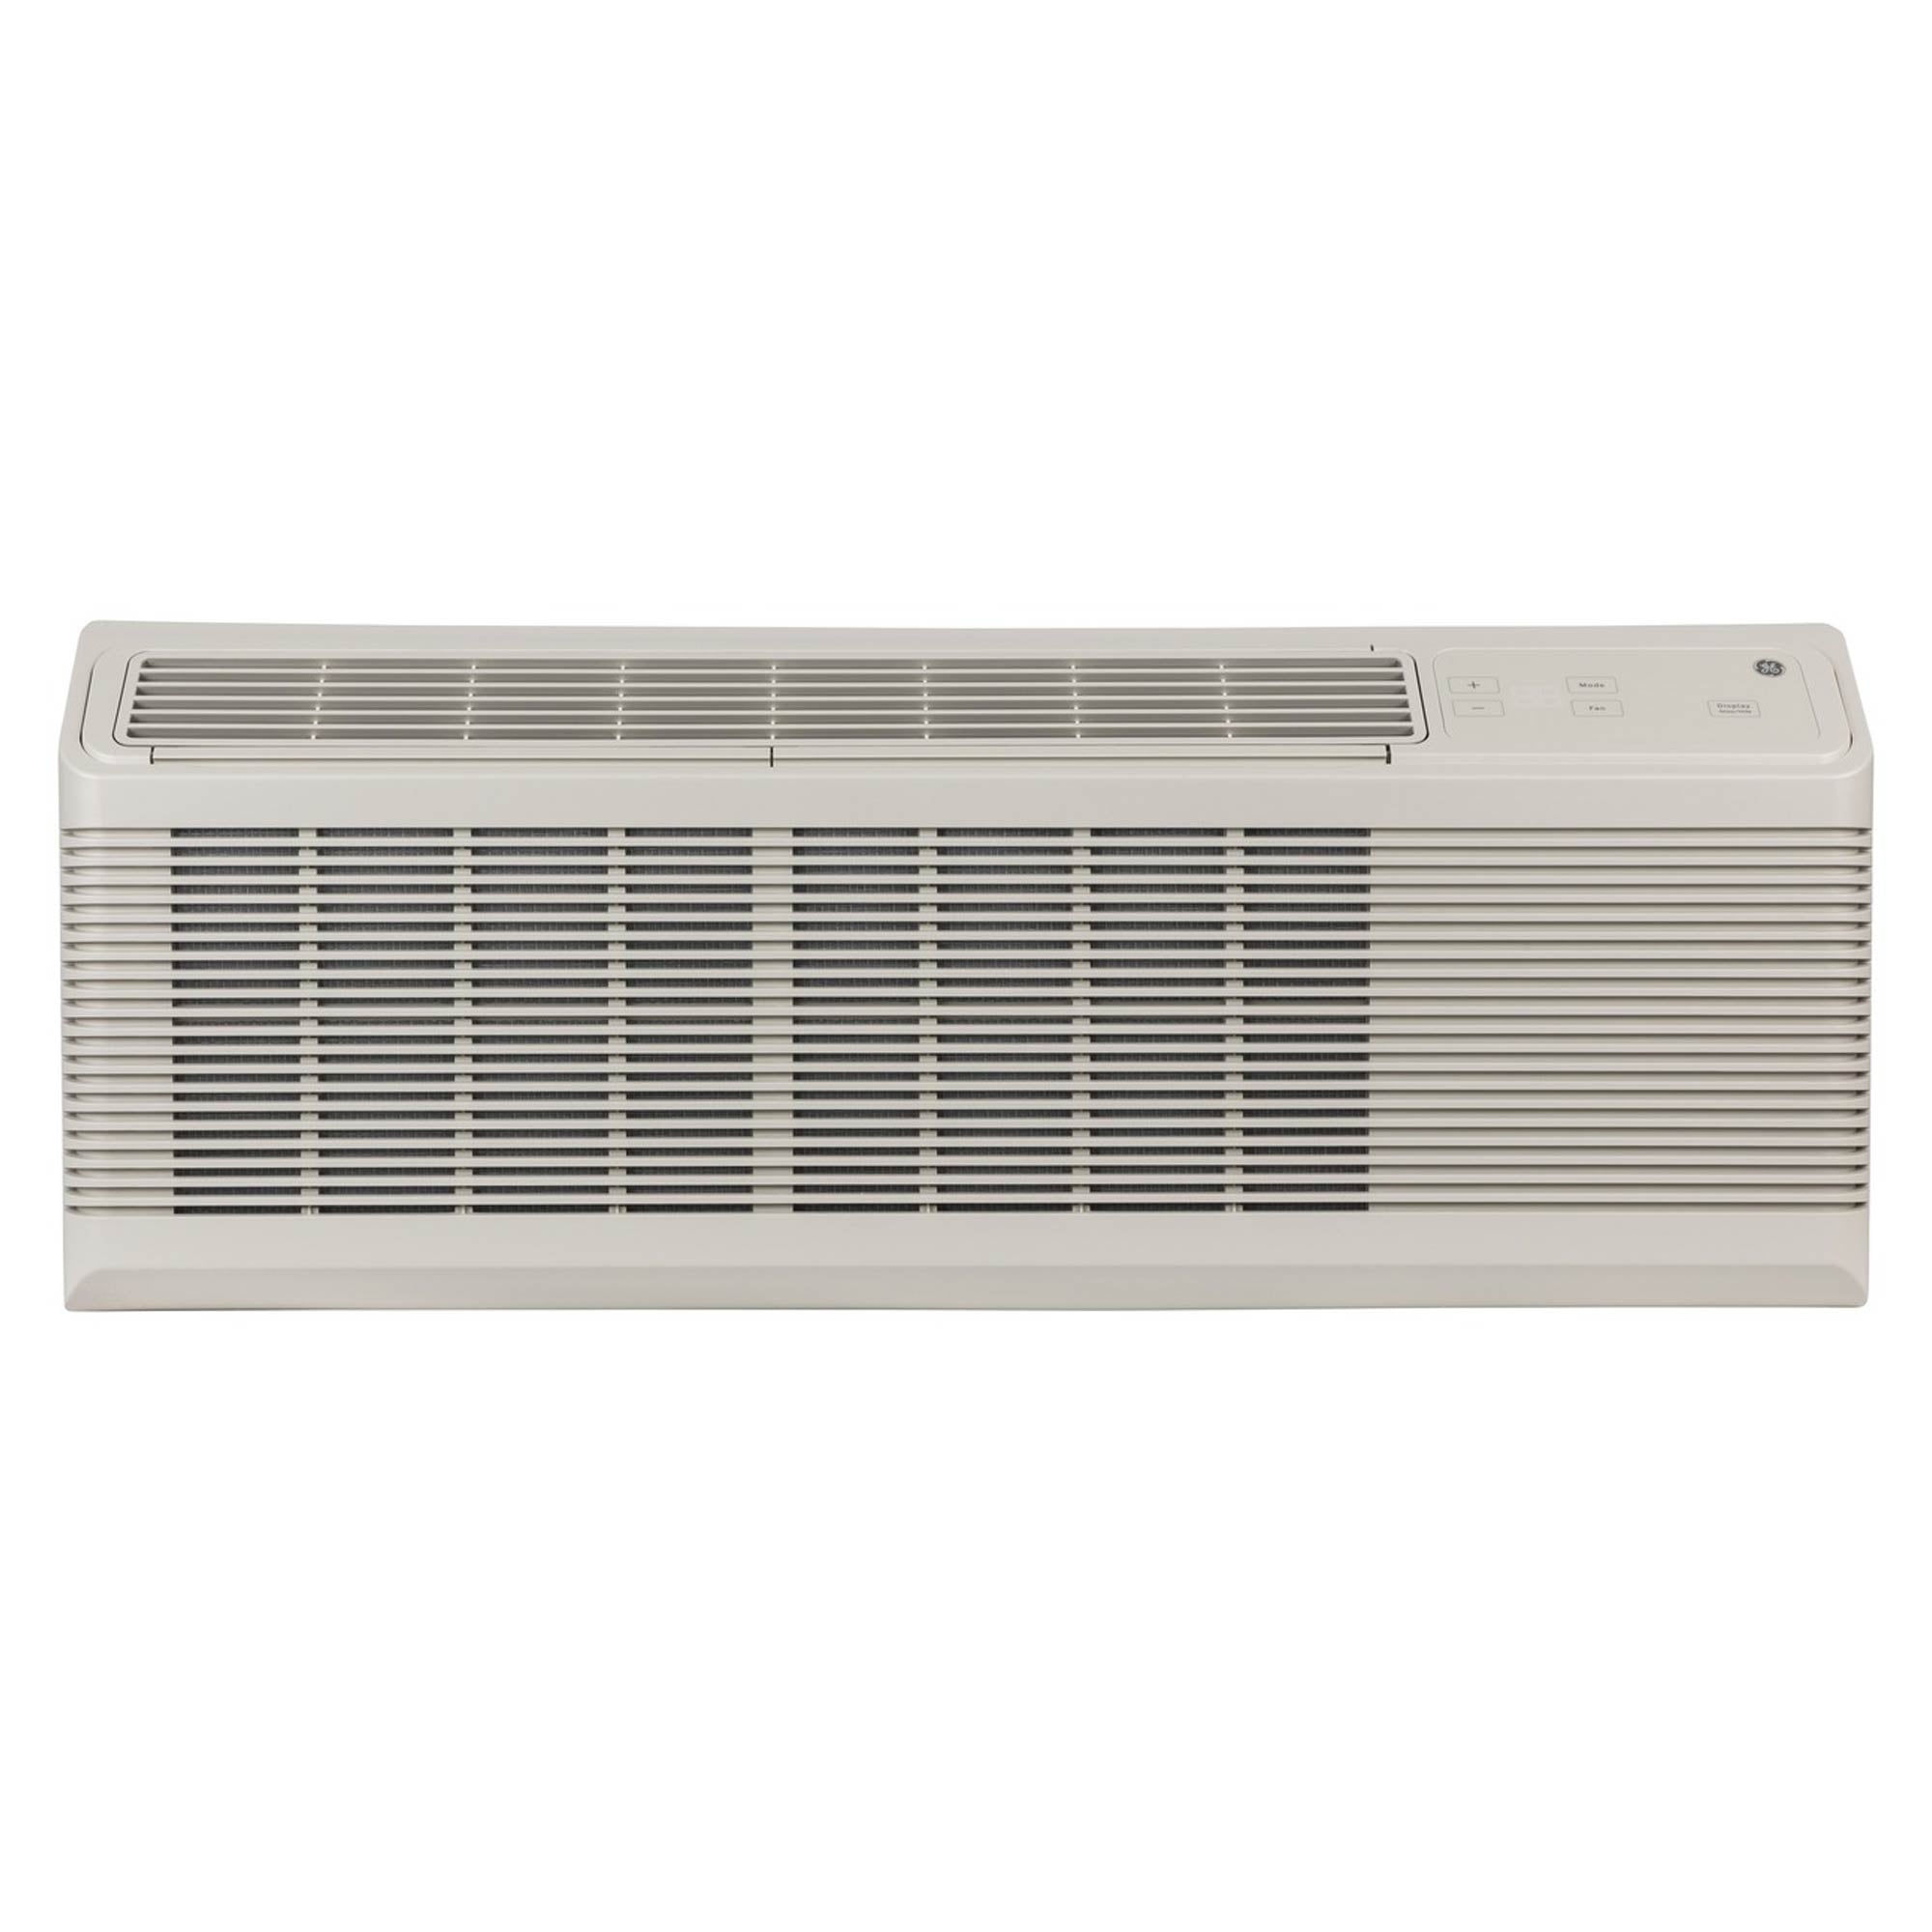 GE Zoneline 11,900/11,800 BTU PTAC Heat Pump with Corrosion Protection